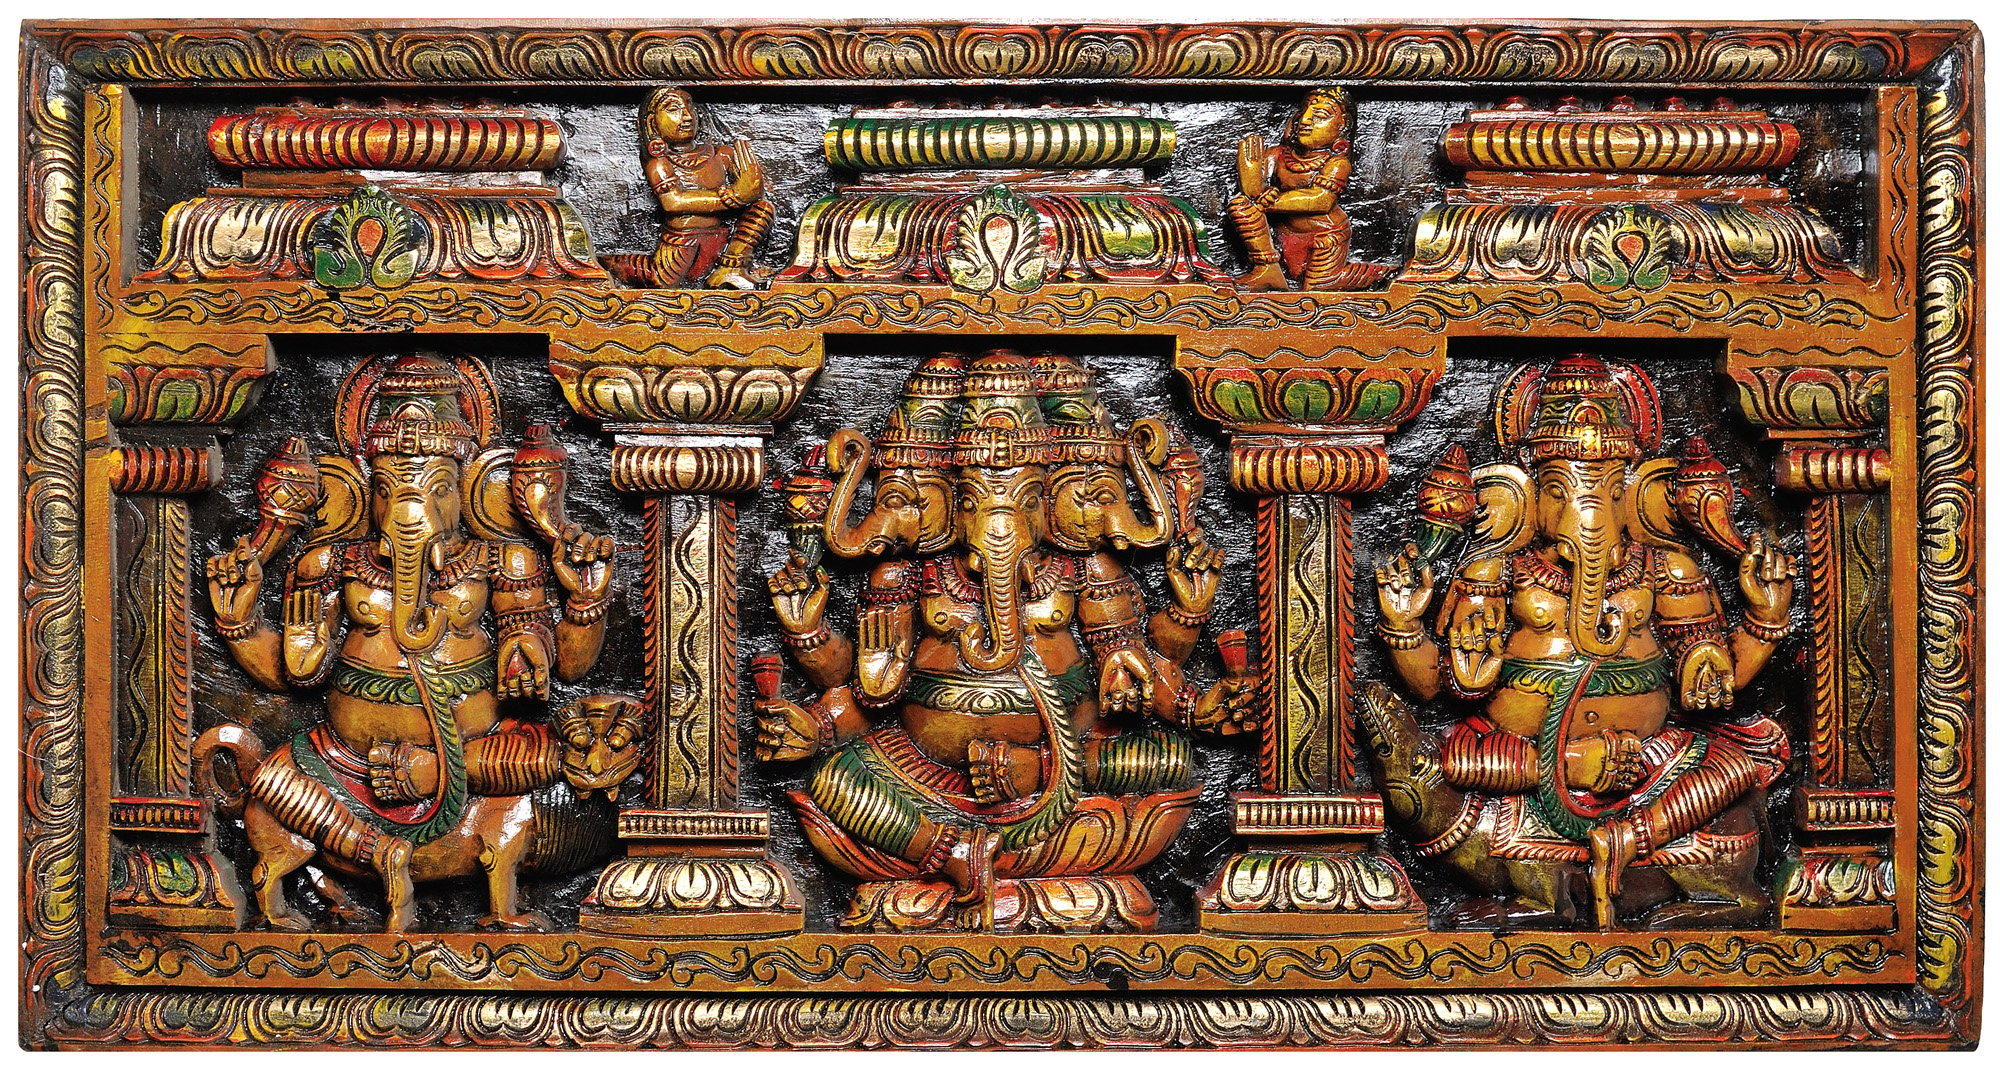 ganesha-in-different-forms-panel